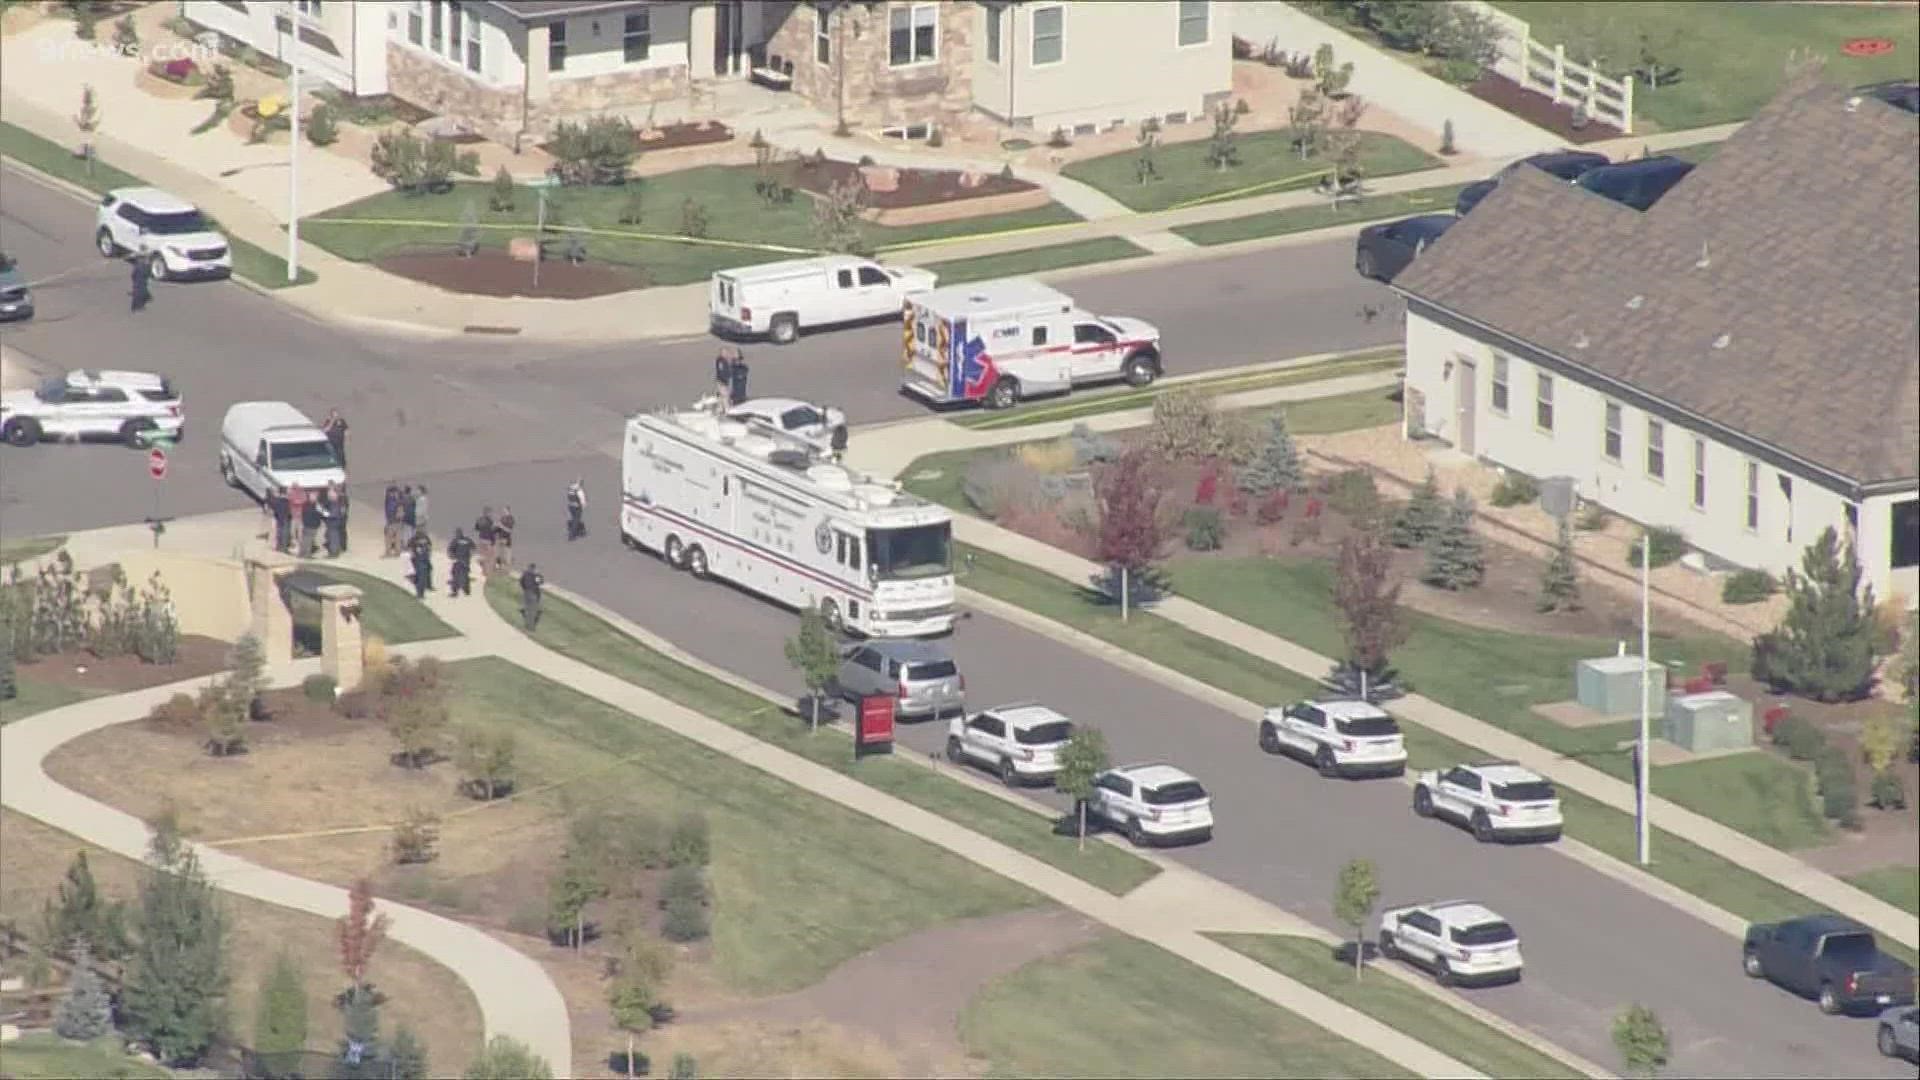 A suspect was seen leaving the area and has not been found, according to Longmont Police.